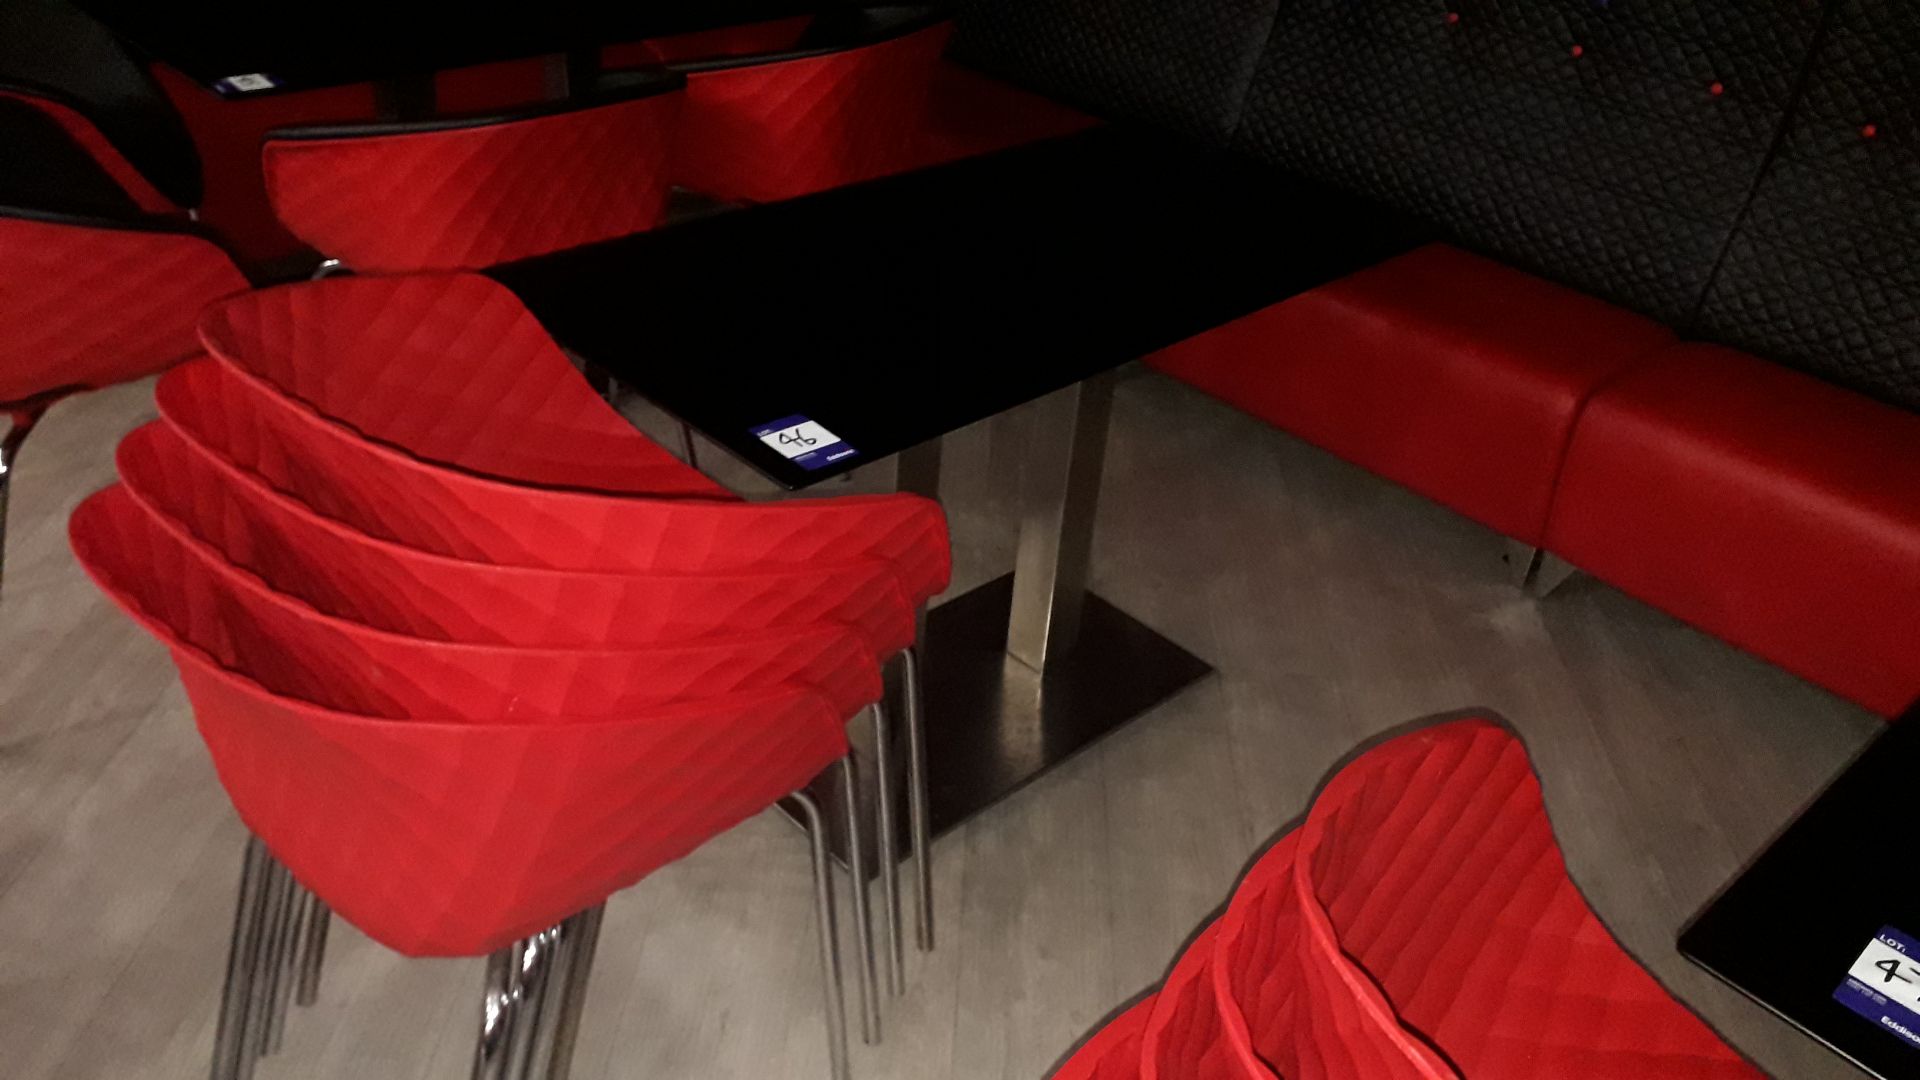 4 x Metamobil red plastic stackable chairs and chrome based pedestal table (1,200mm) - Image 2 of 2